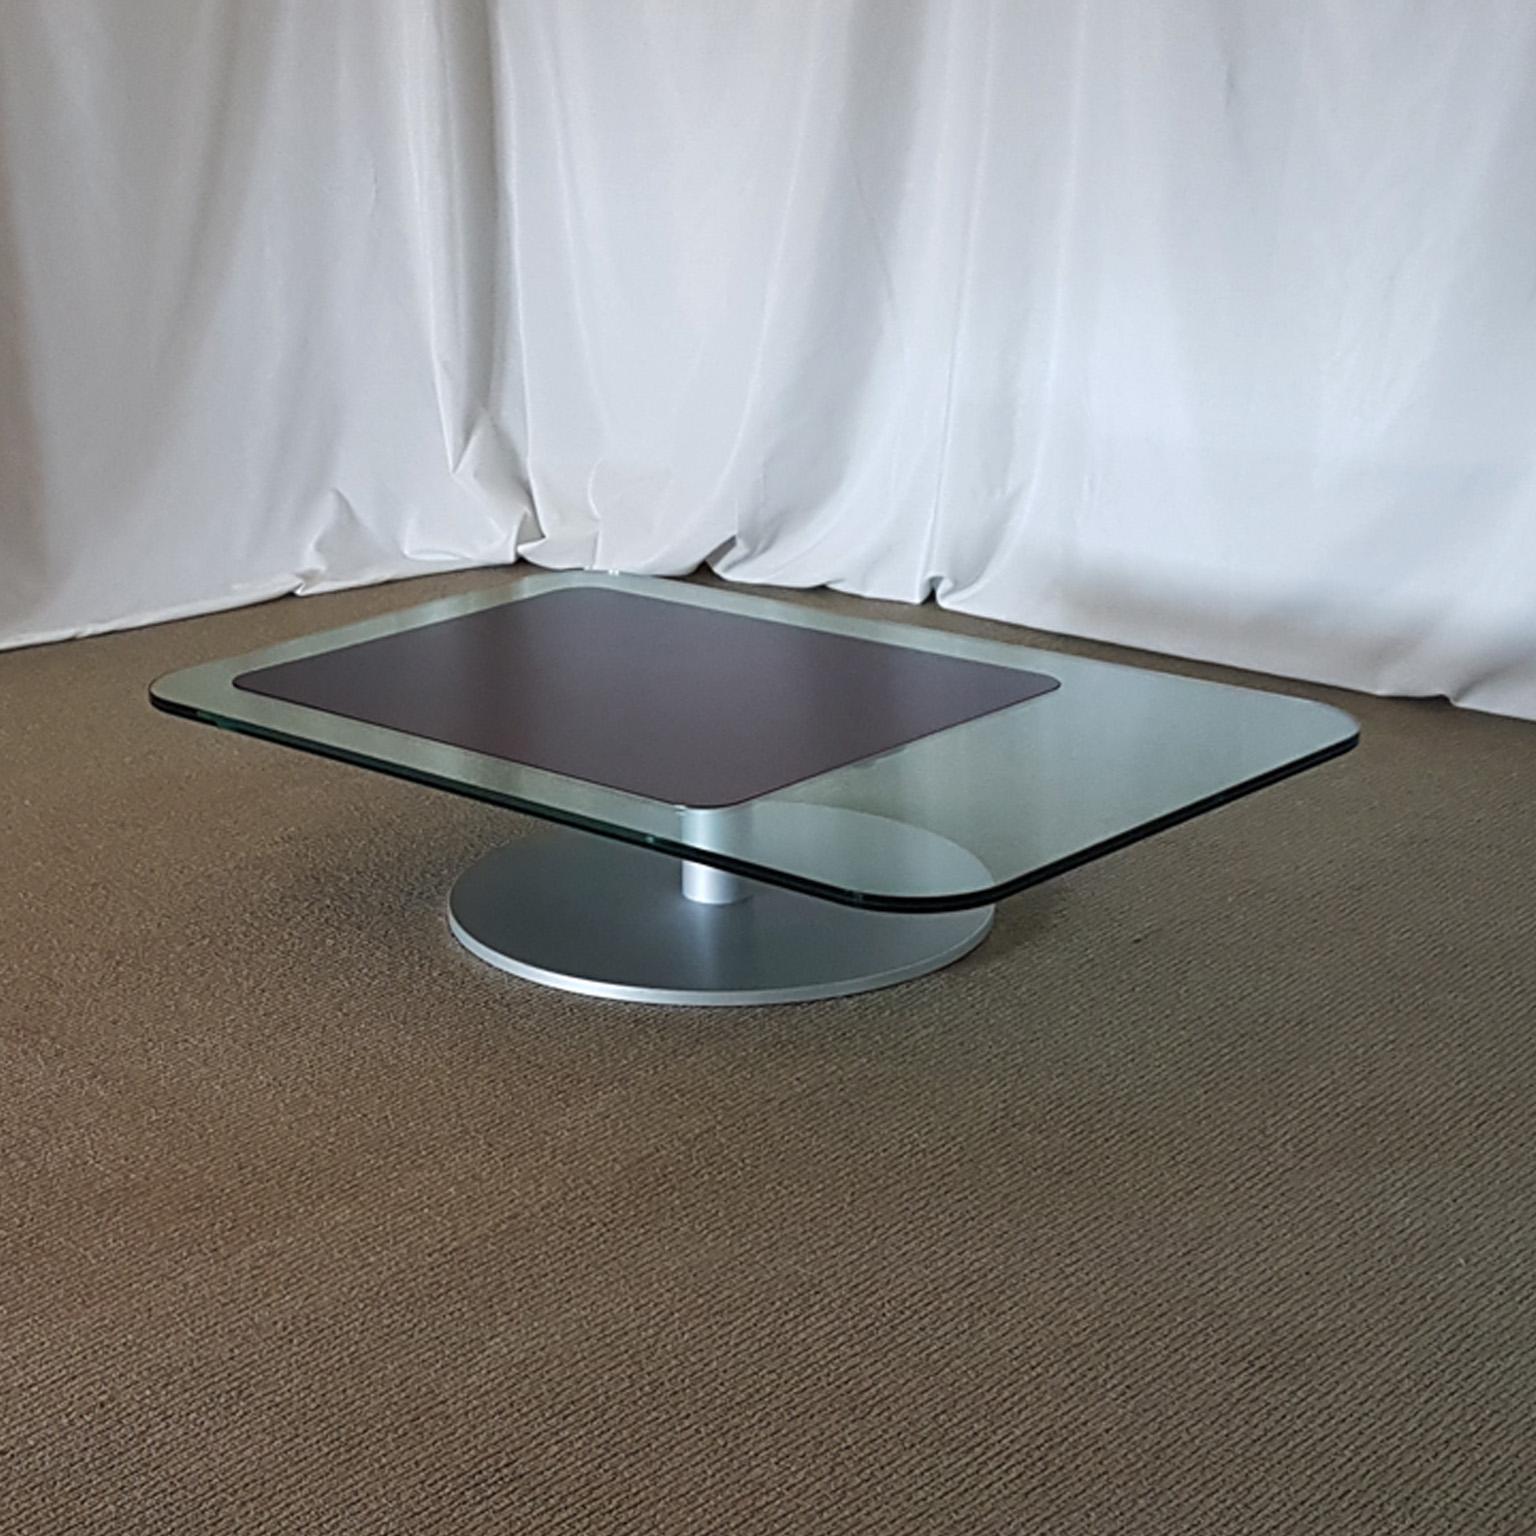 Other Italian Tempered Crystal Centre Table with Wood Insert, 21st Century For Sale